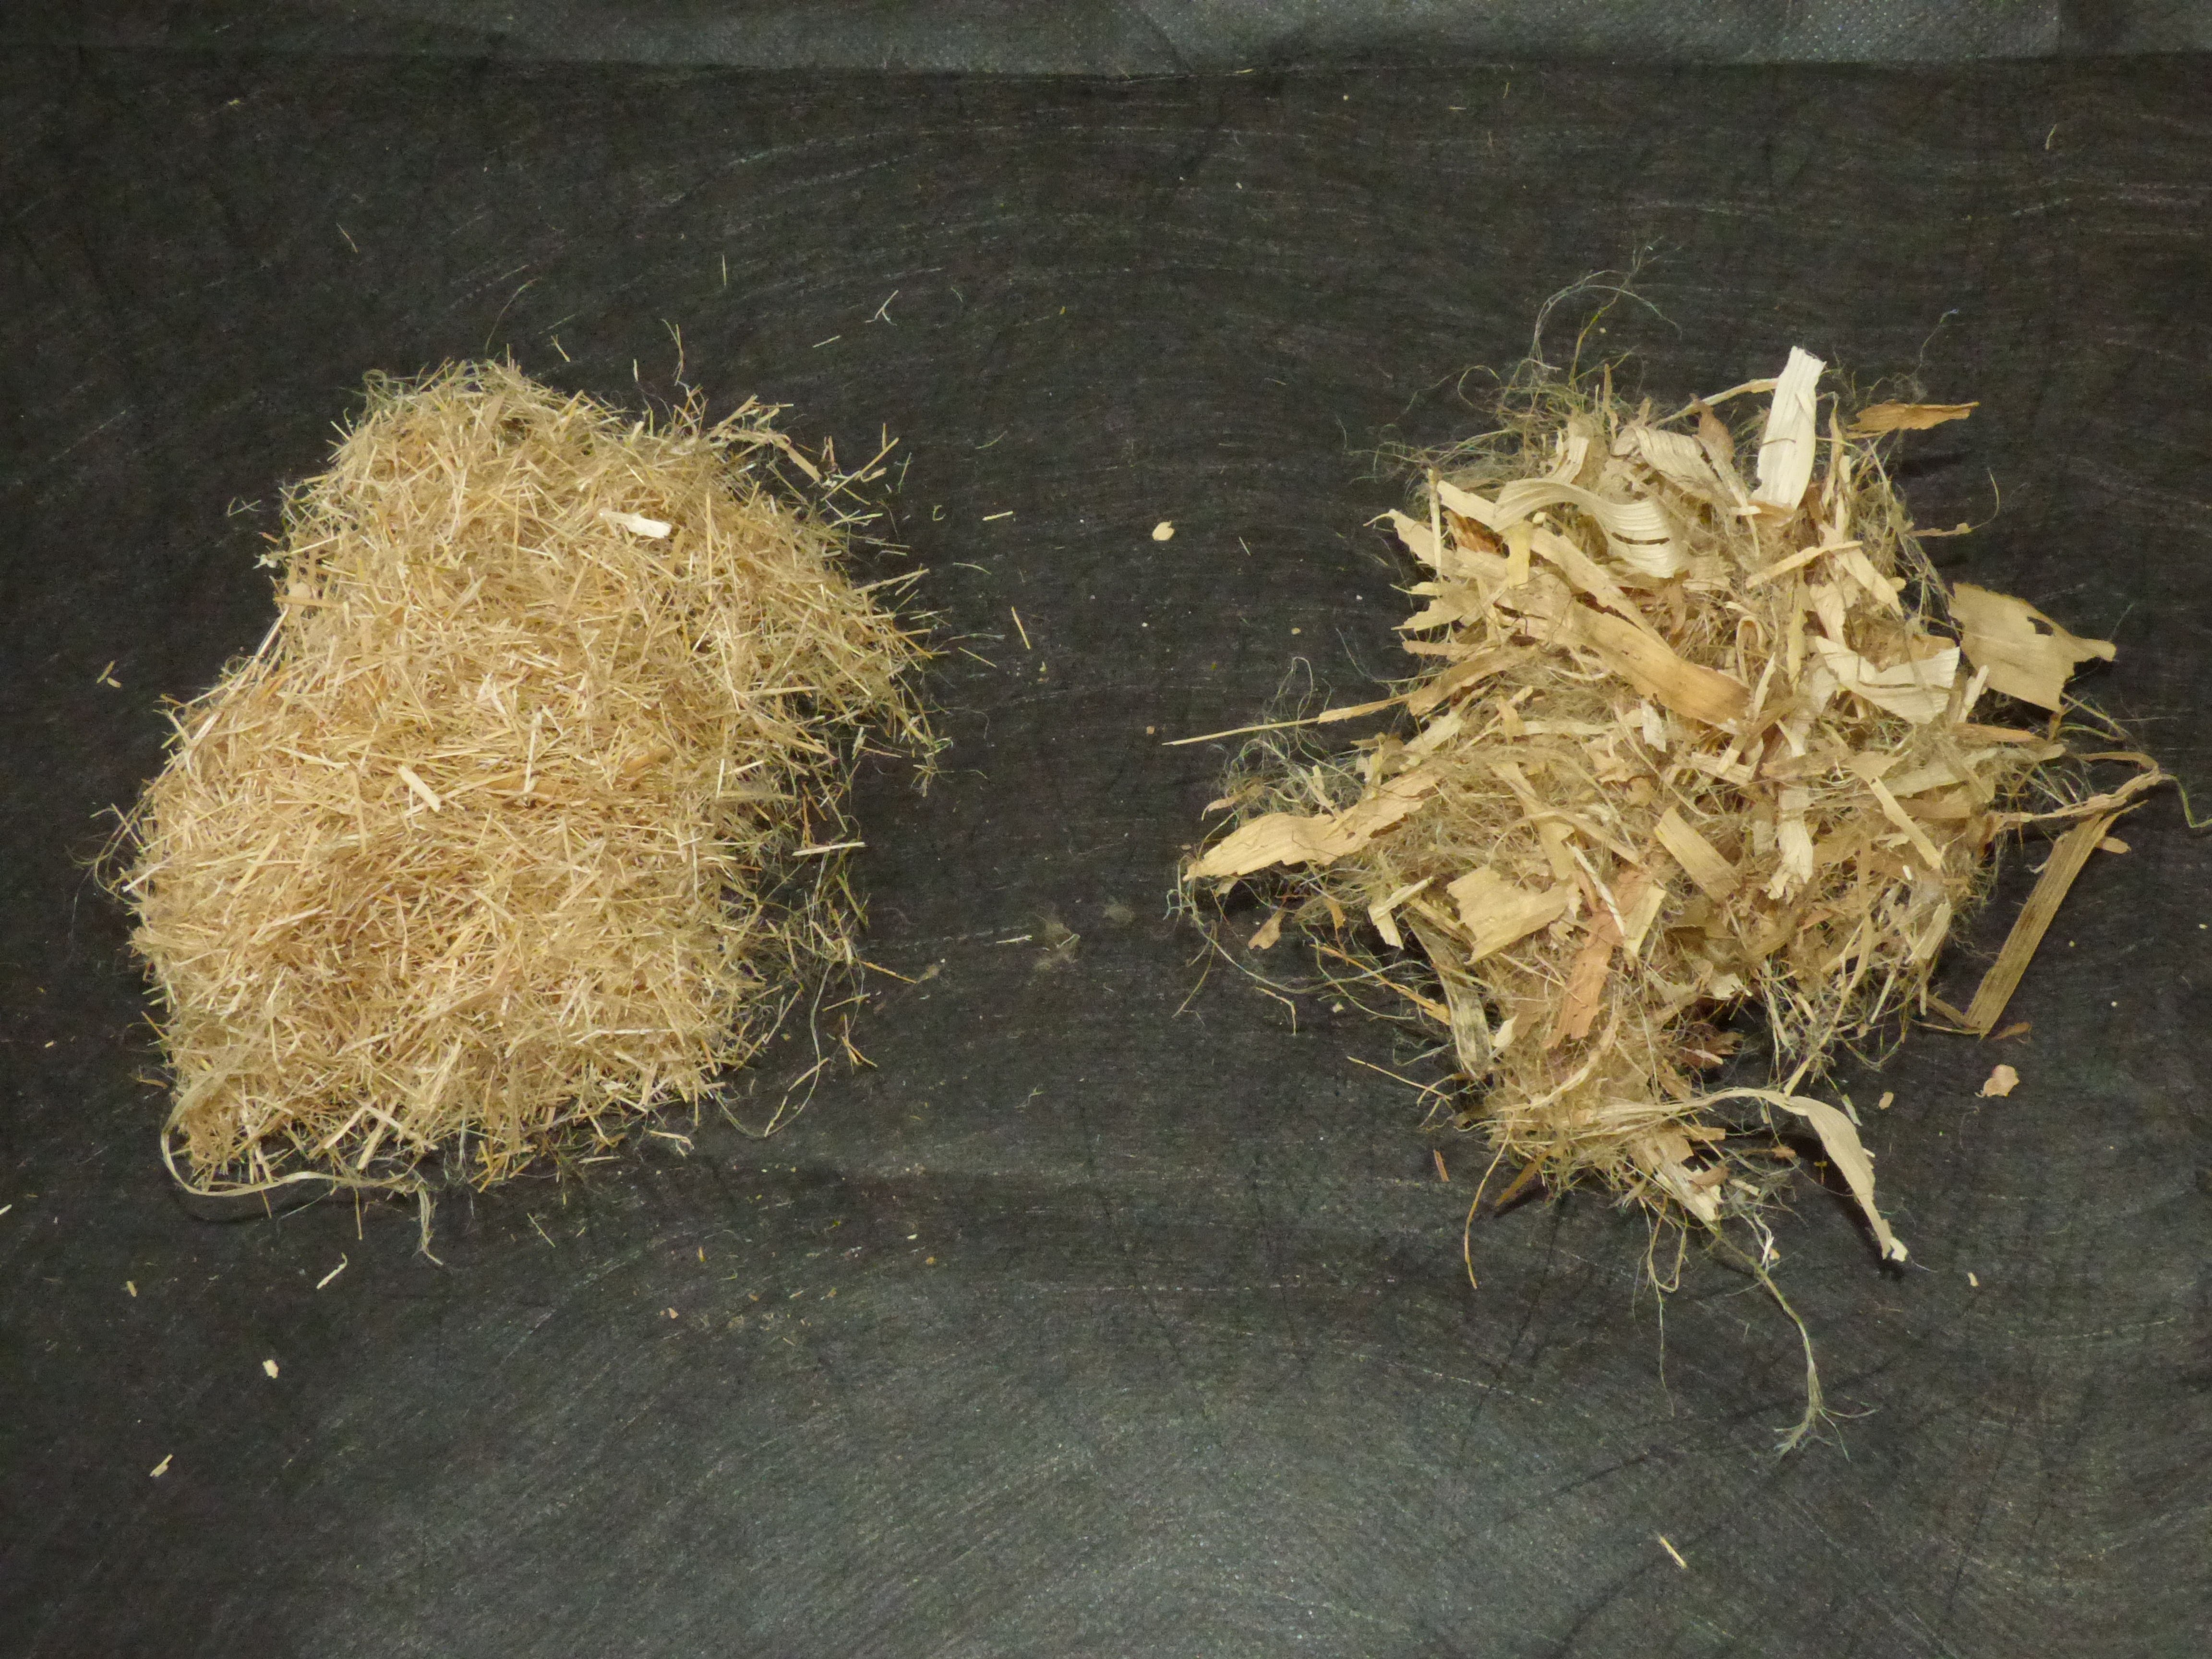 Two small heaps of straw-like yellow fibres